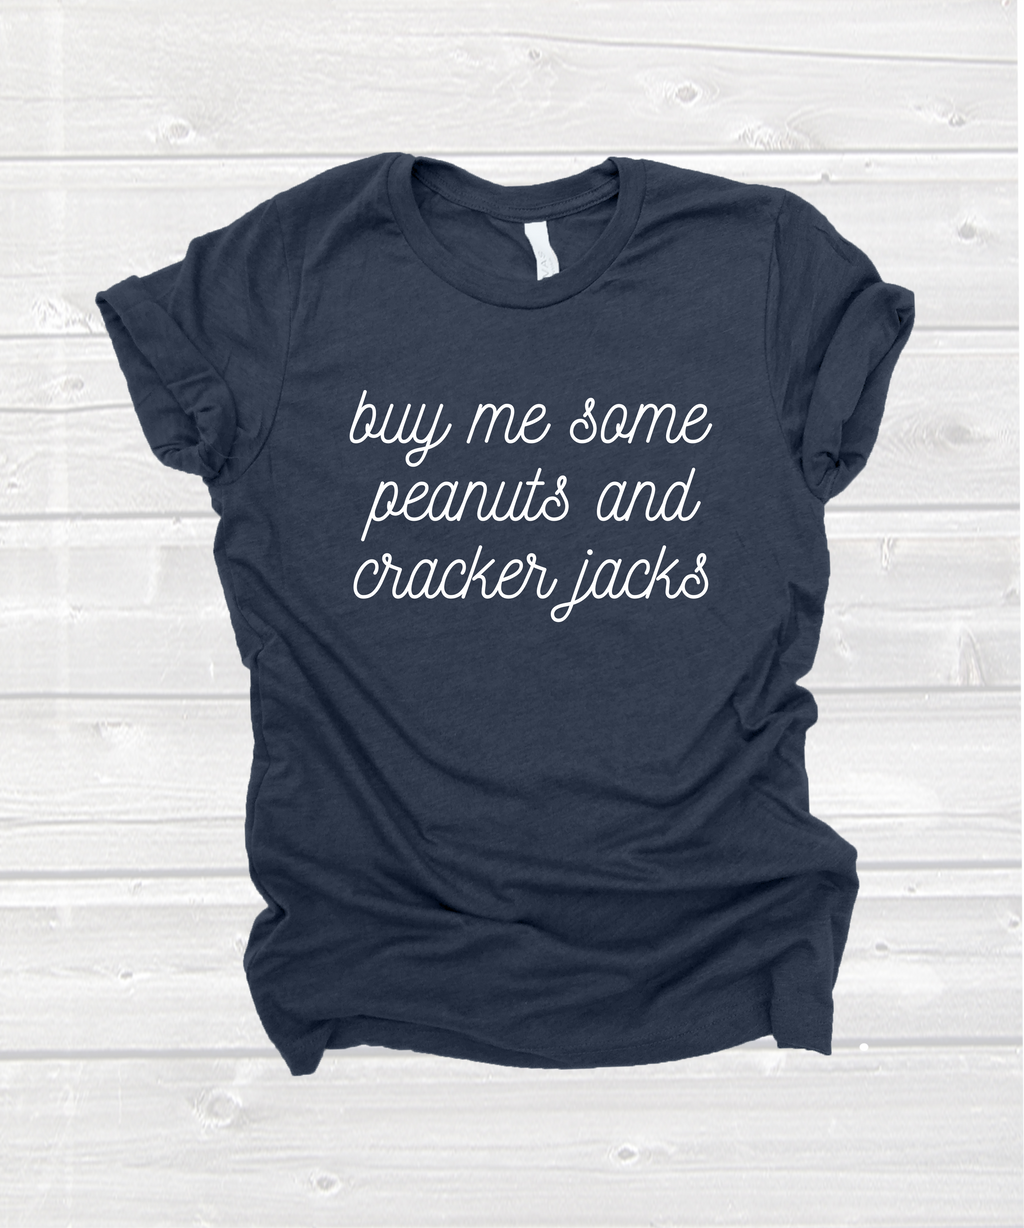 "buy me some peanuts and cracker jacks" tee in heather navy